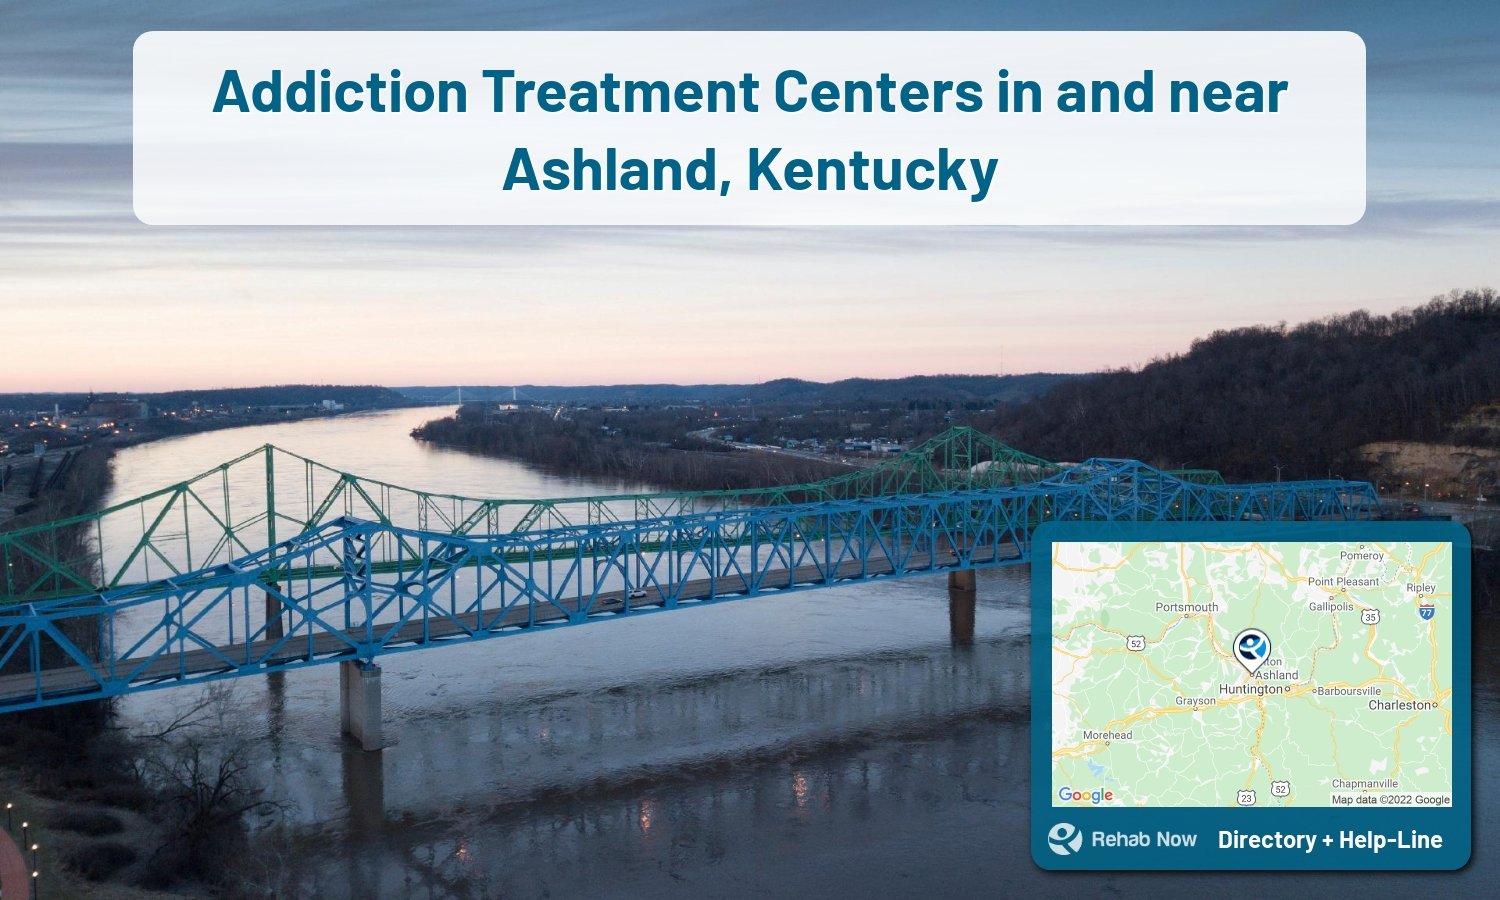 Our experts can help you find treatment now in Ashland, Kentucky. We list drug rehab and alcohol centers in Kentucky.